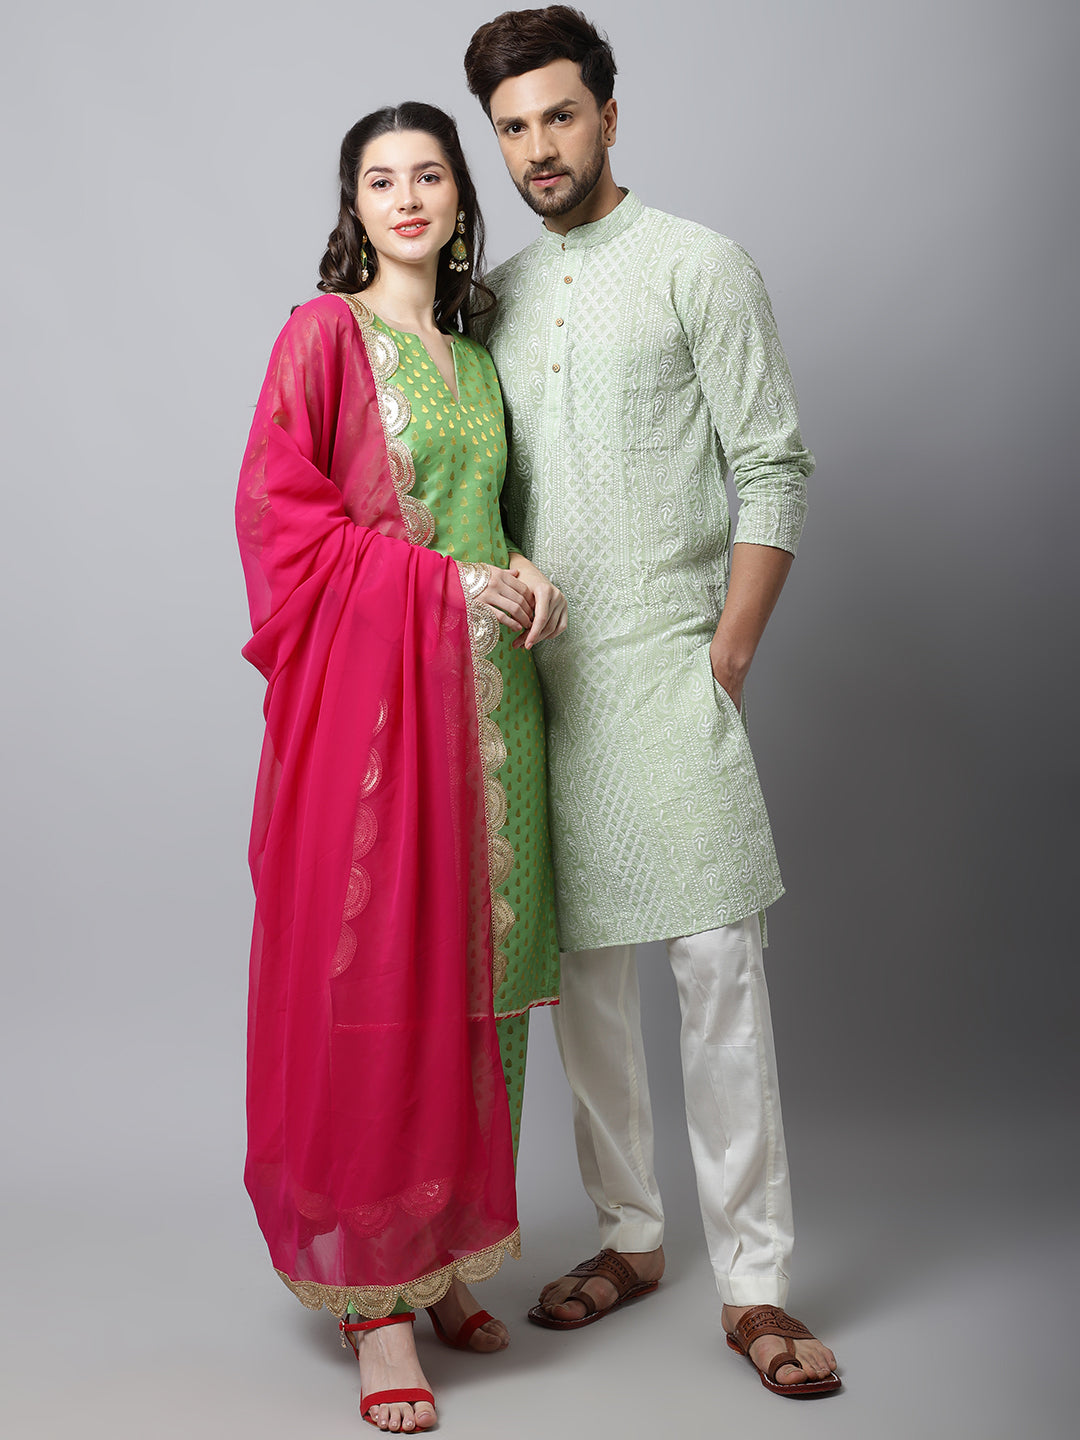 Buy Matching Couple Outfits Online in India - Apella